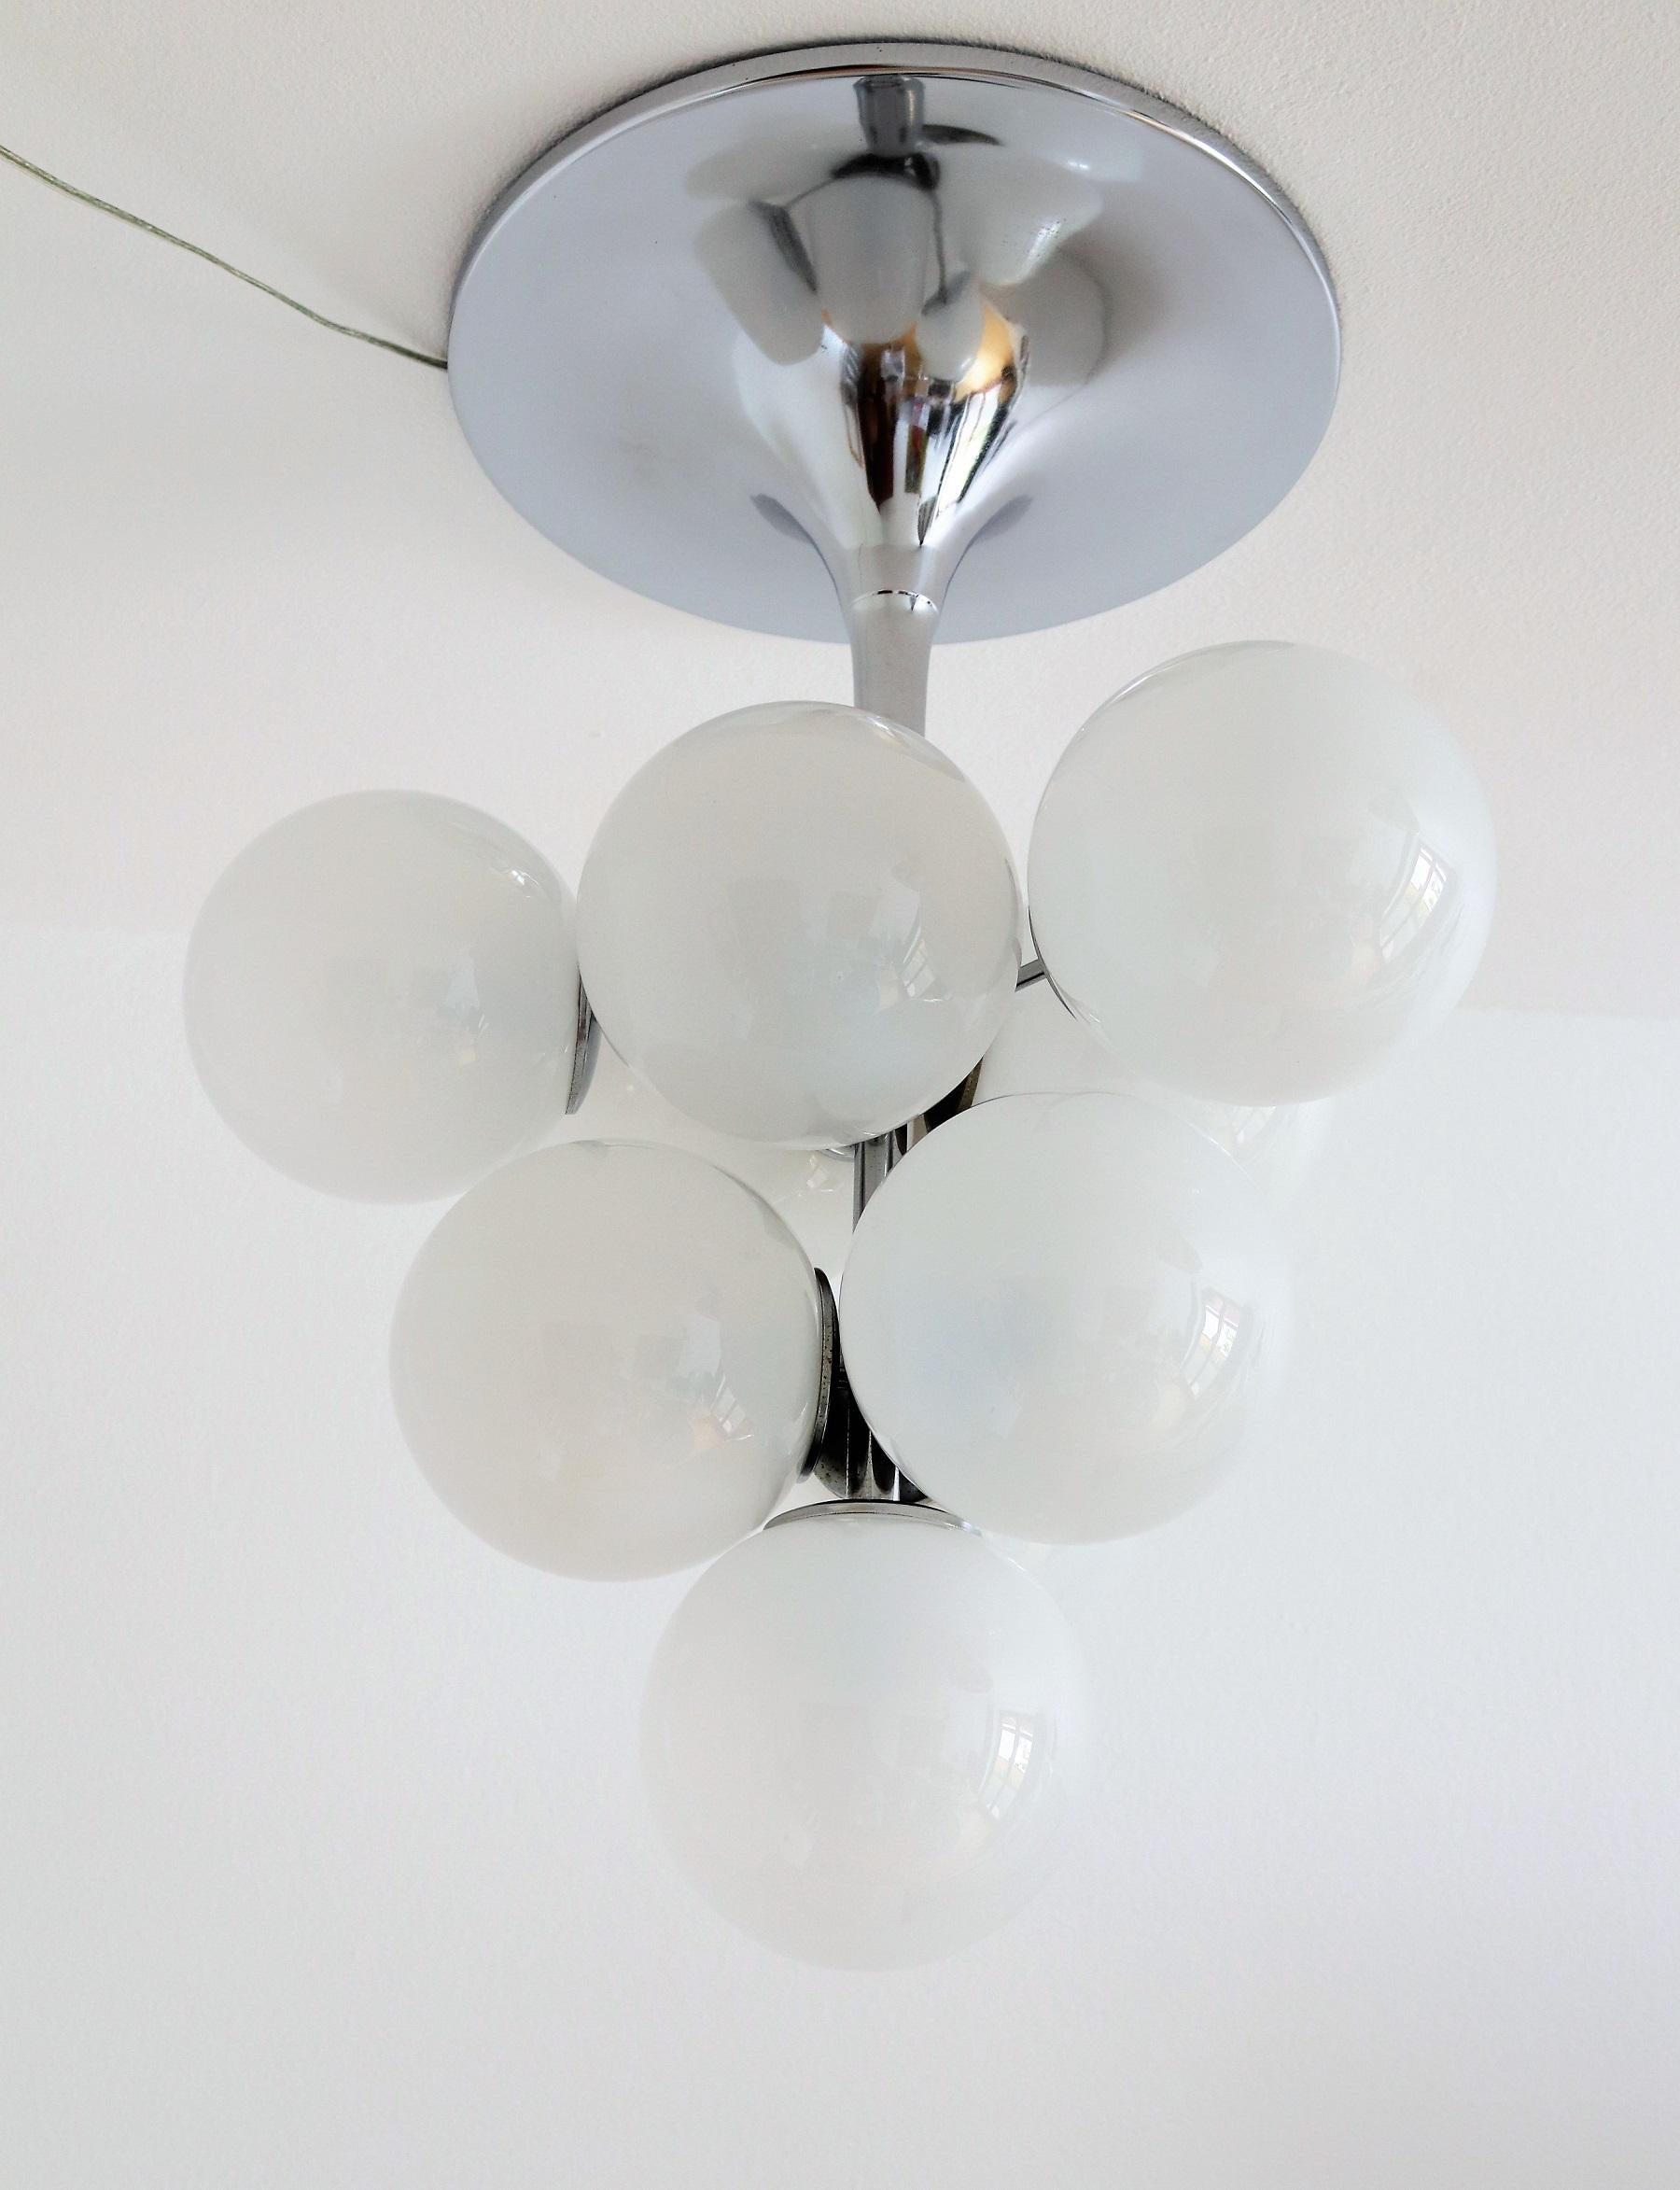 Swiss Mid-Century Tulip Chandelier in Glass and Chrome by Nele for Temde, 1960